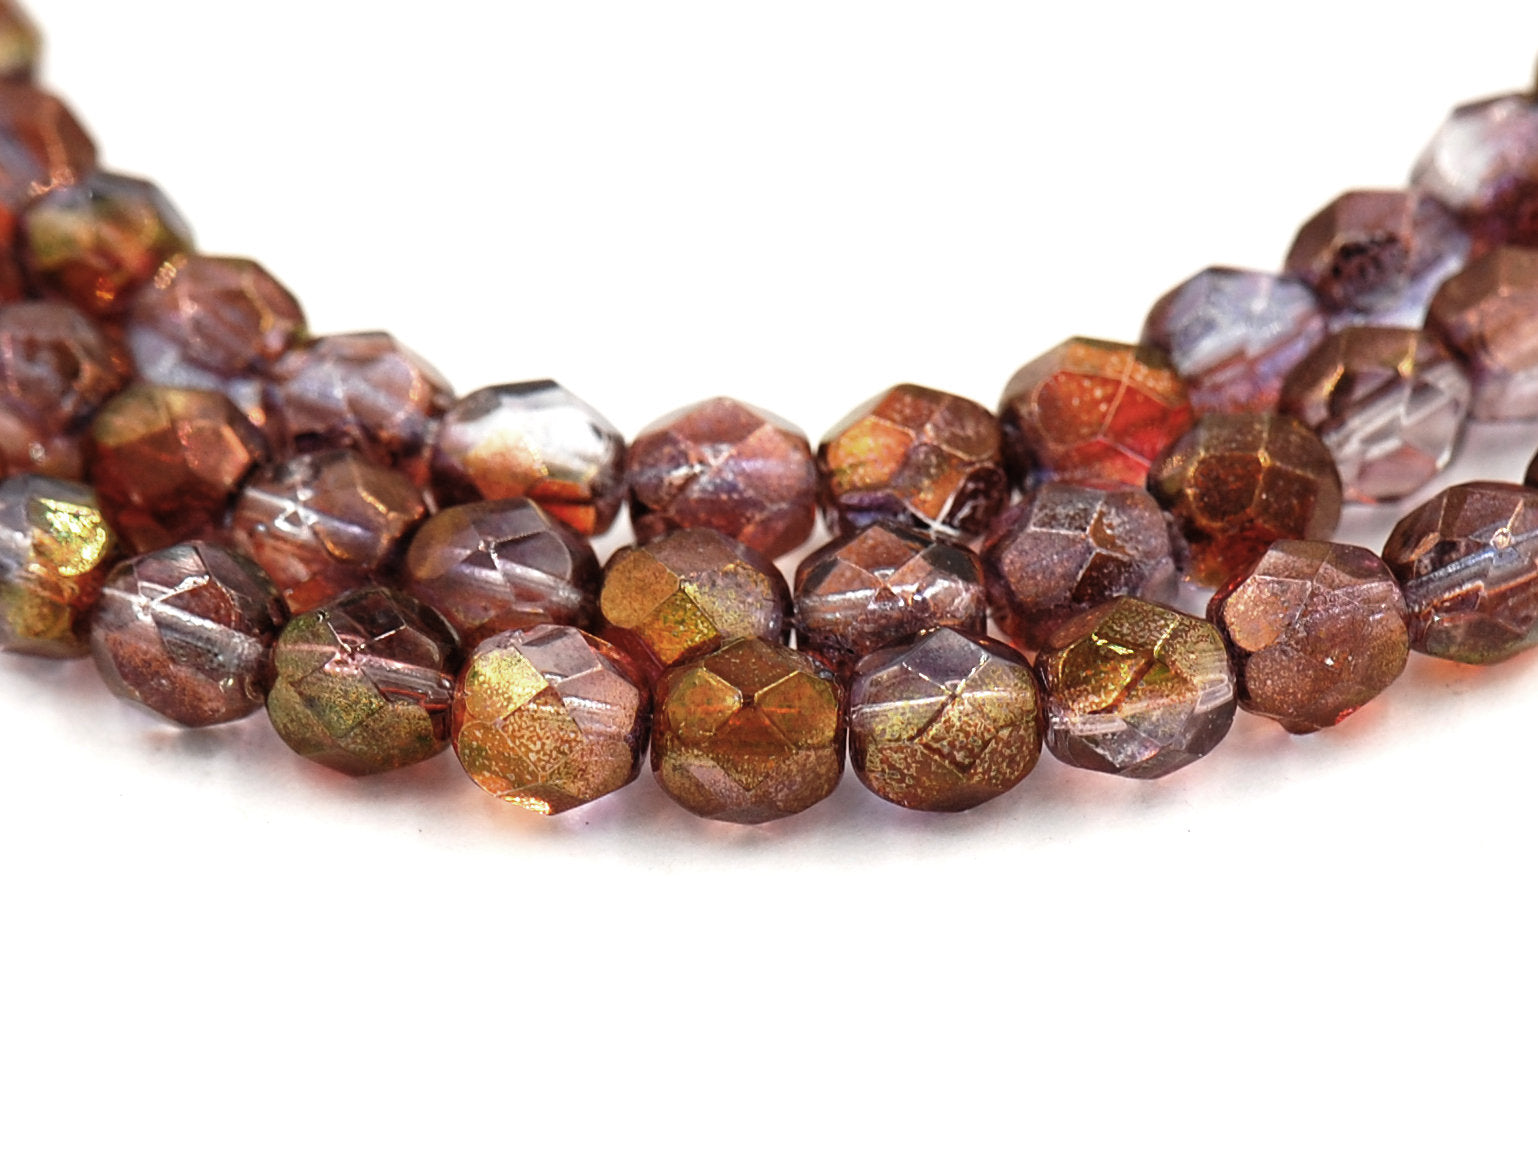 Czech Glass Beads, 6mm Faceted, Fire Polished in Luster Amethyst/Crystal Purple -25